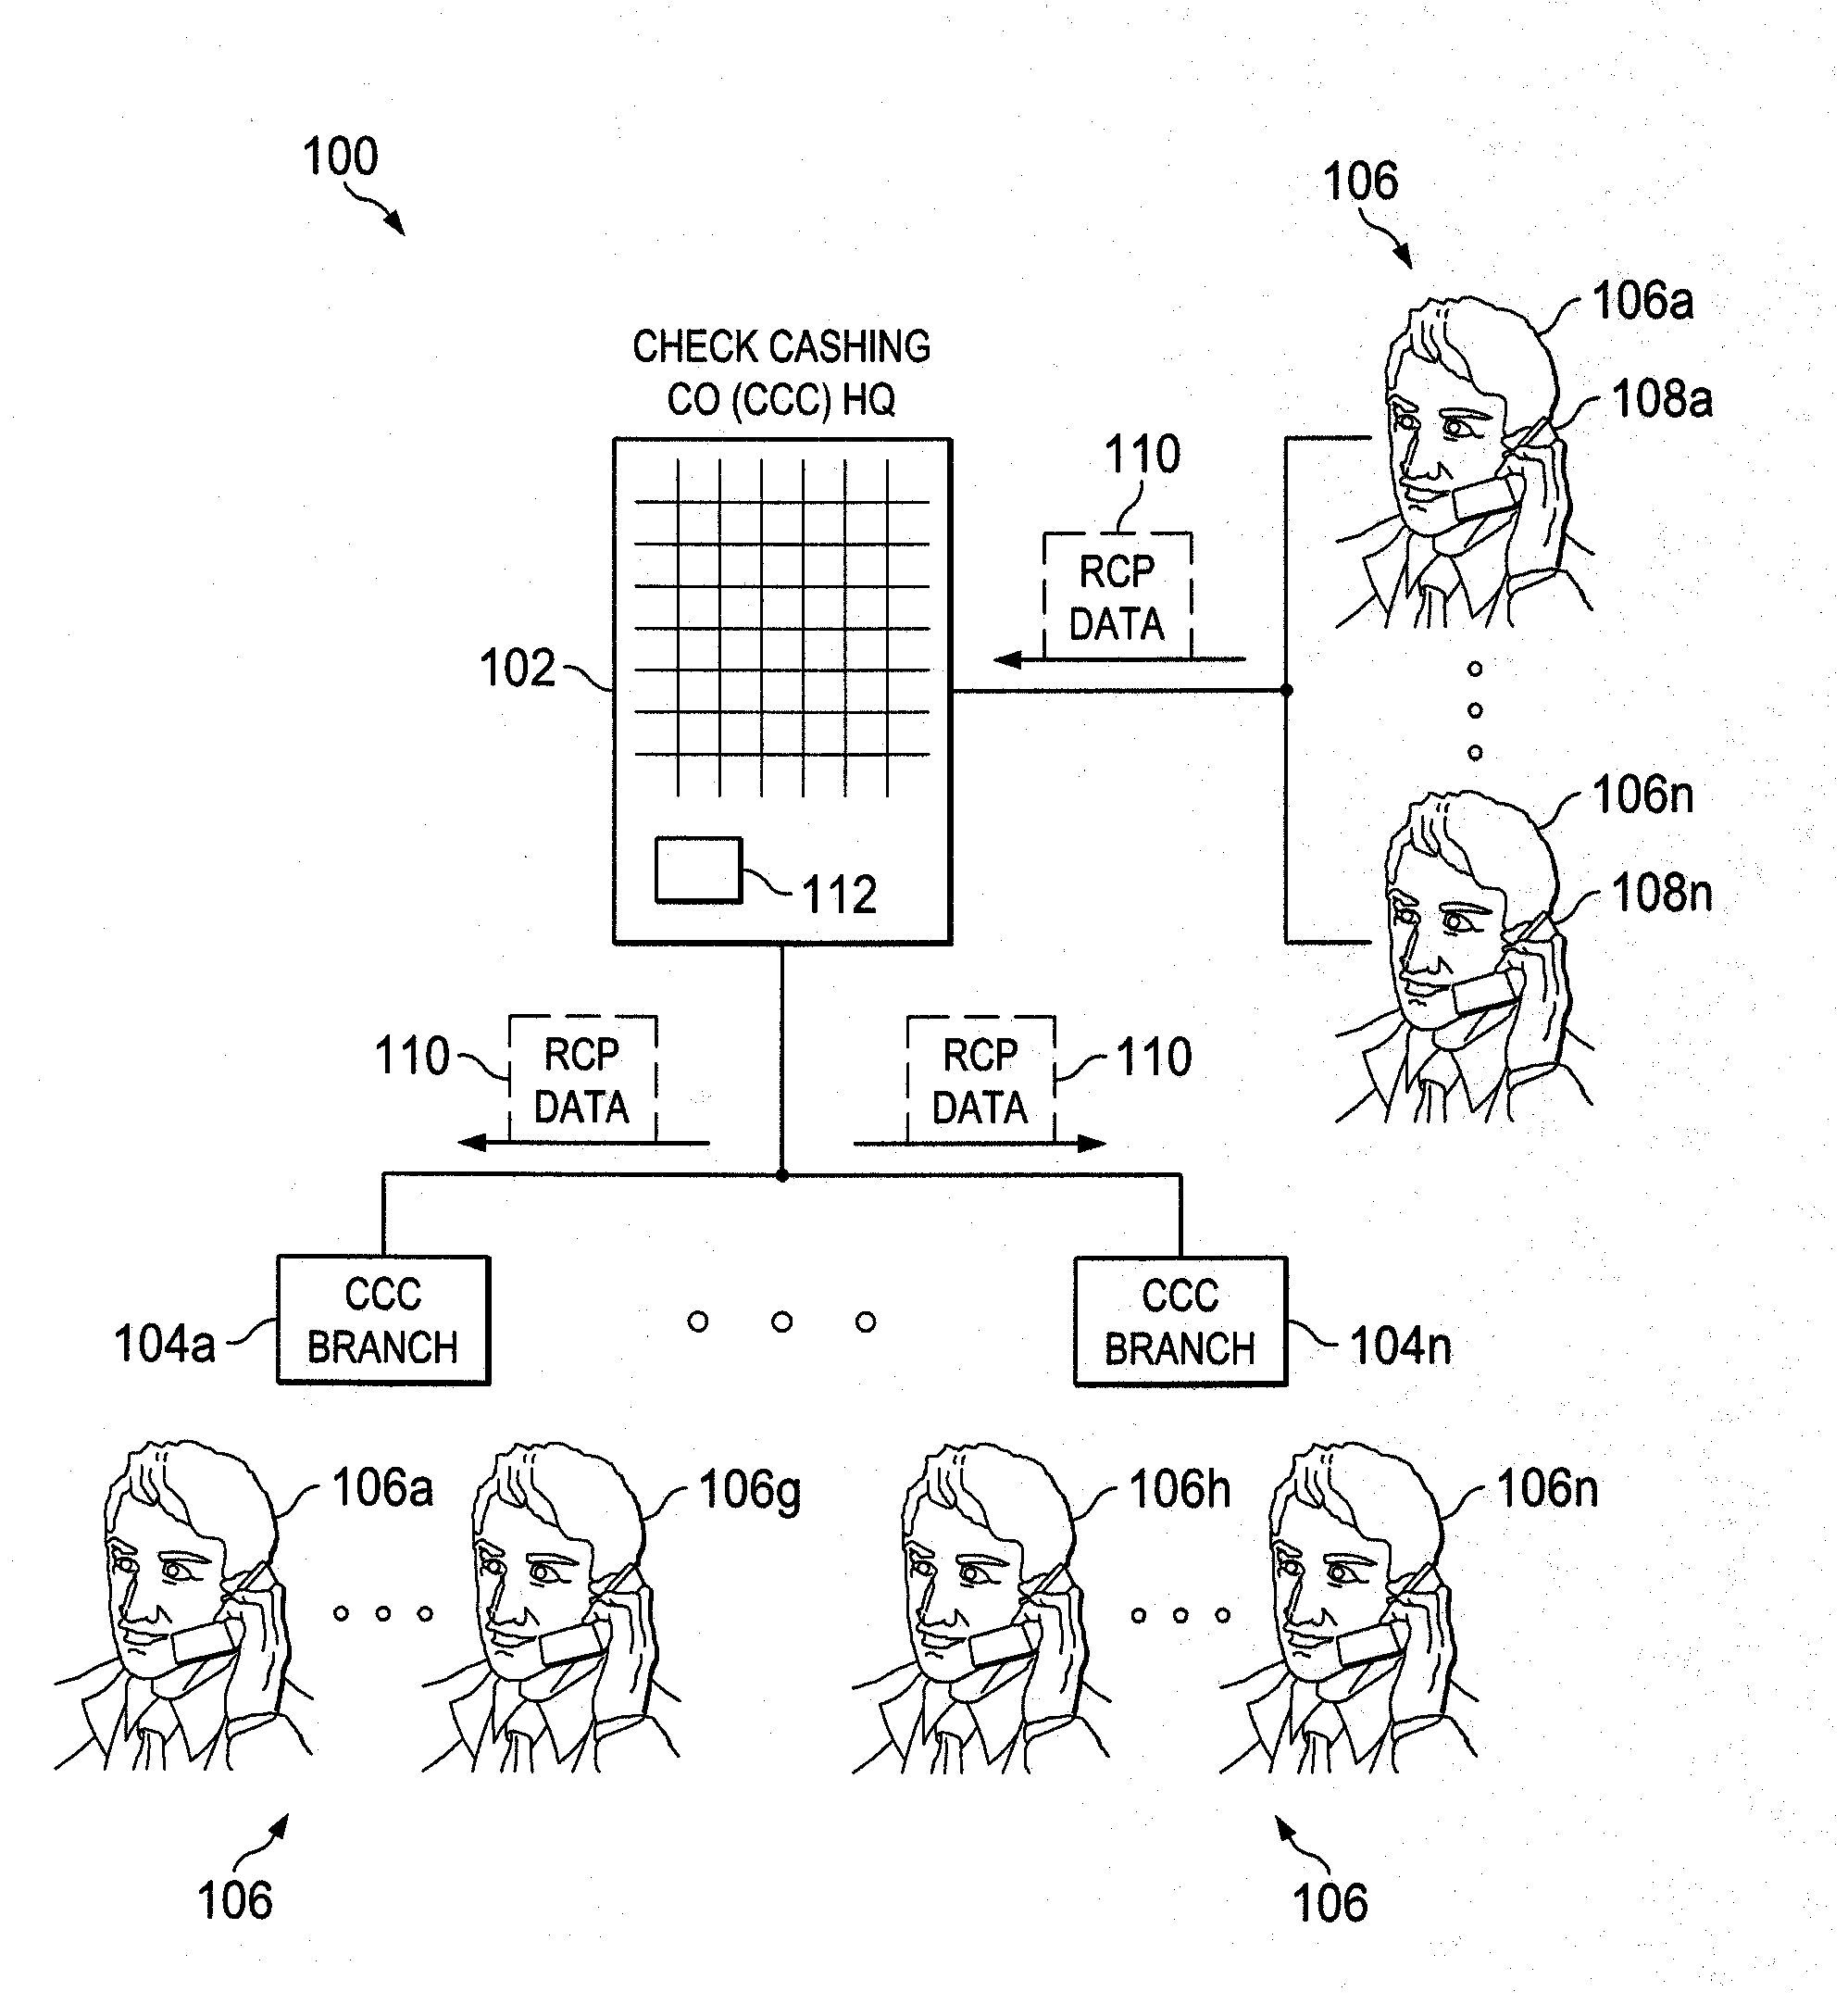 System and method for performing remote check presentment (RCP) transactions by a check cashing company